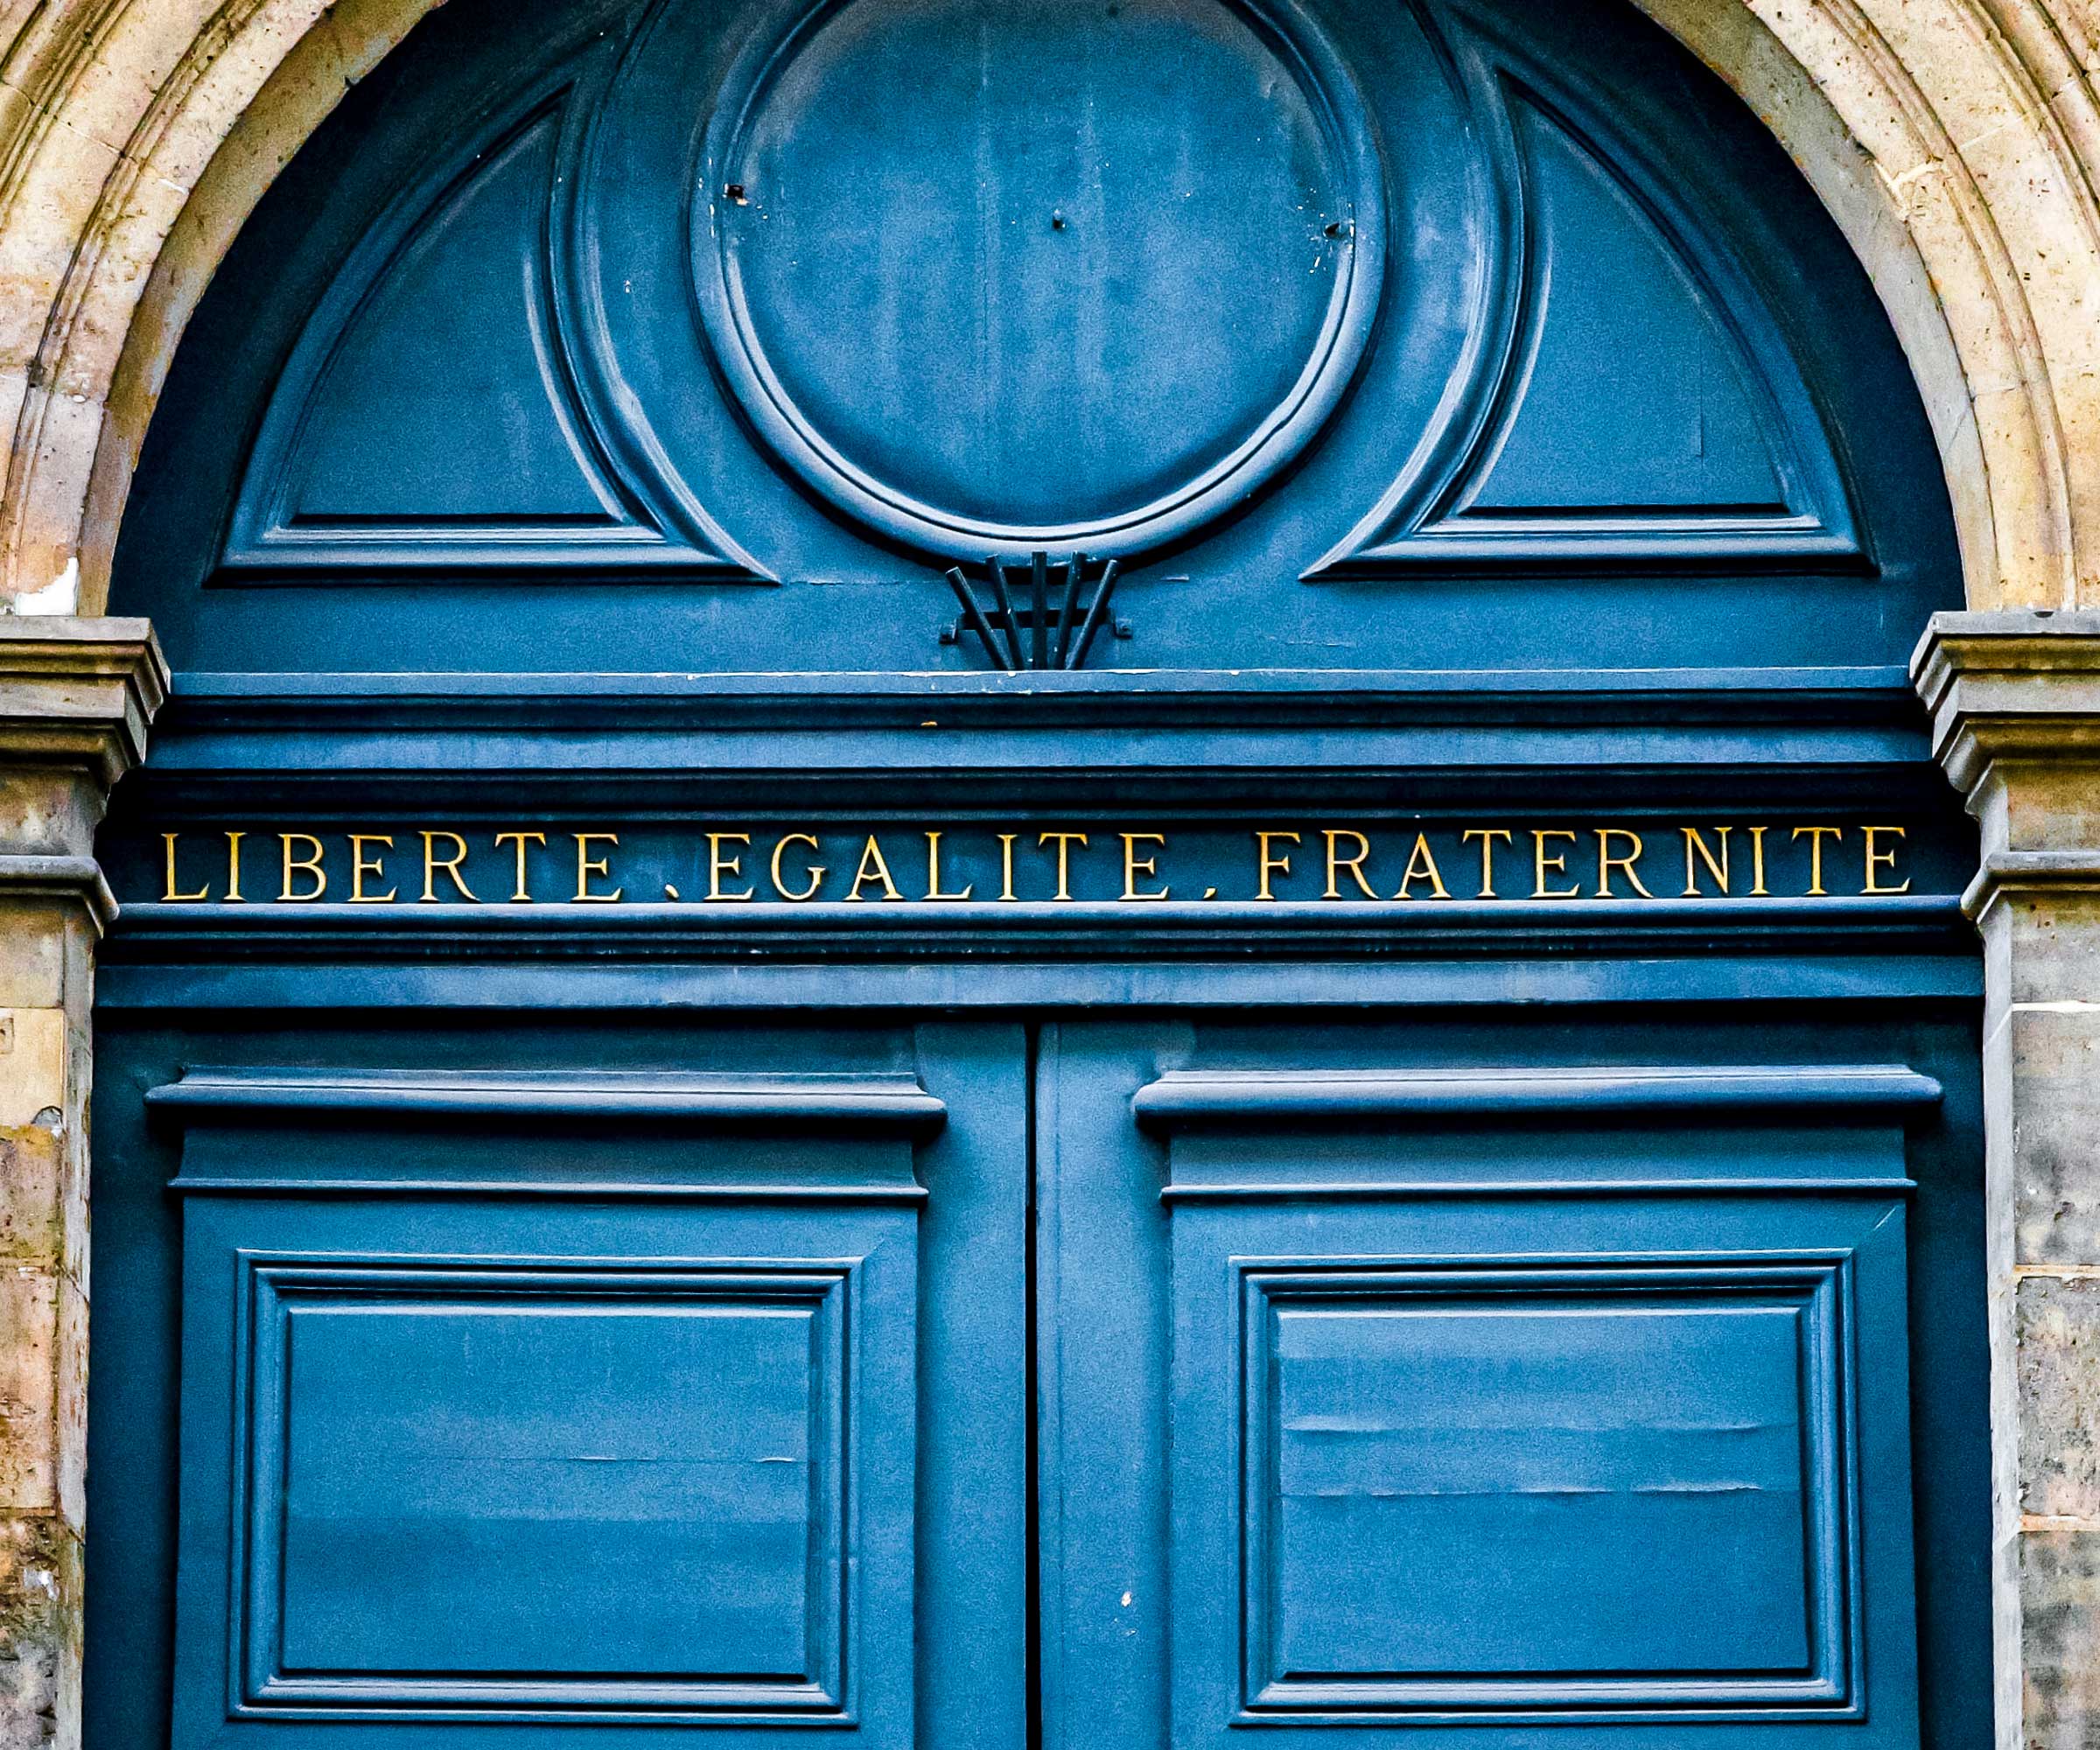 The French Republican motto. © Godong/Alamy Stock Photo